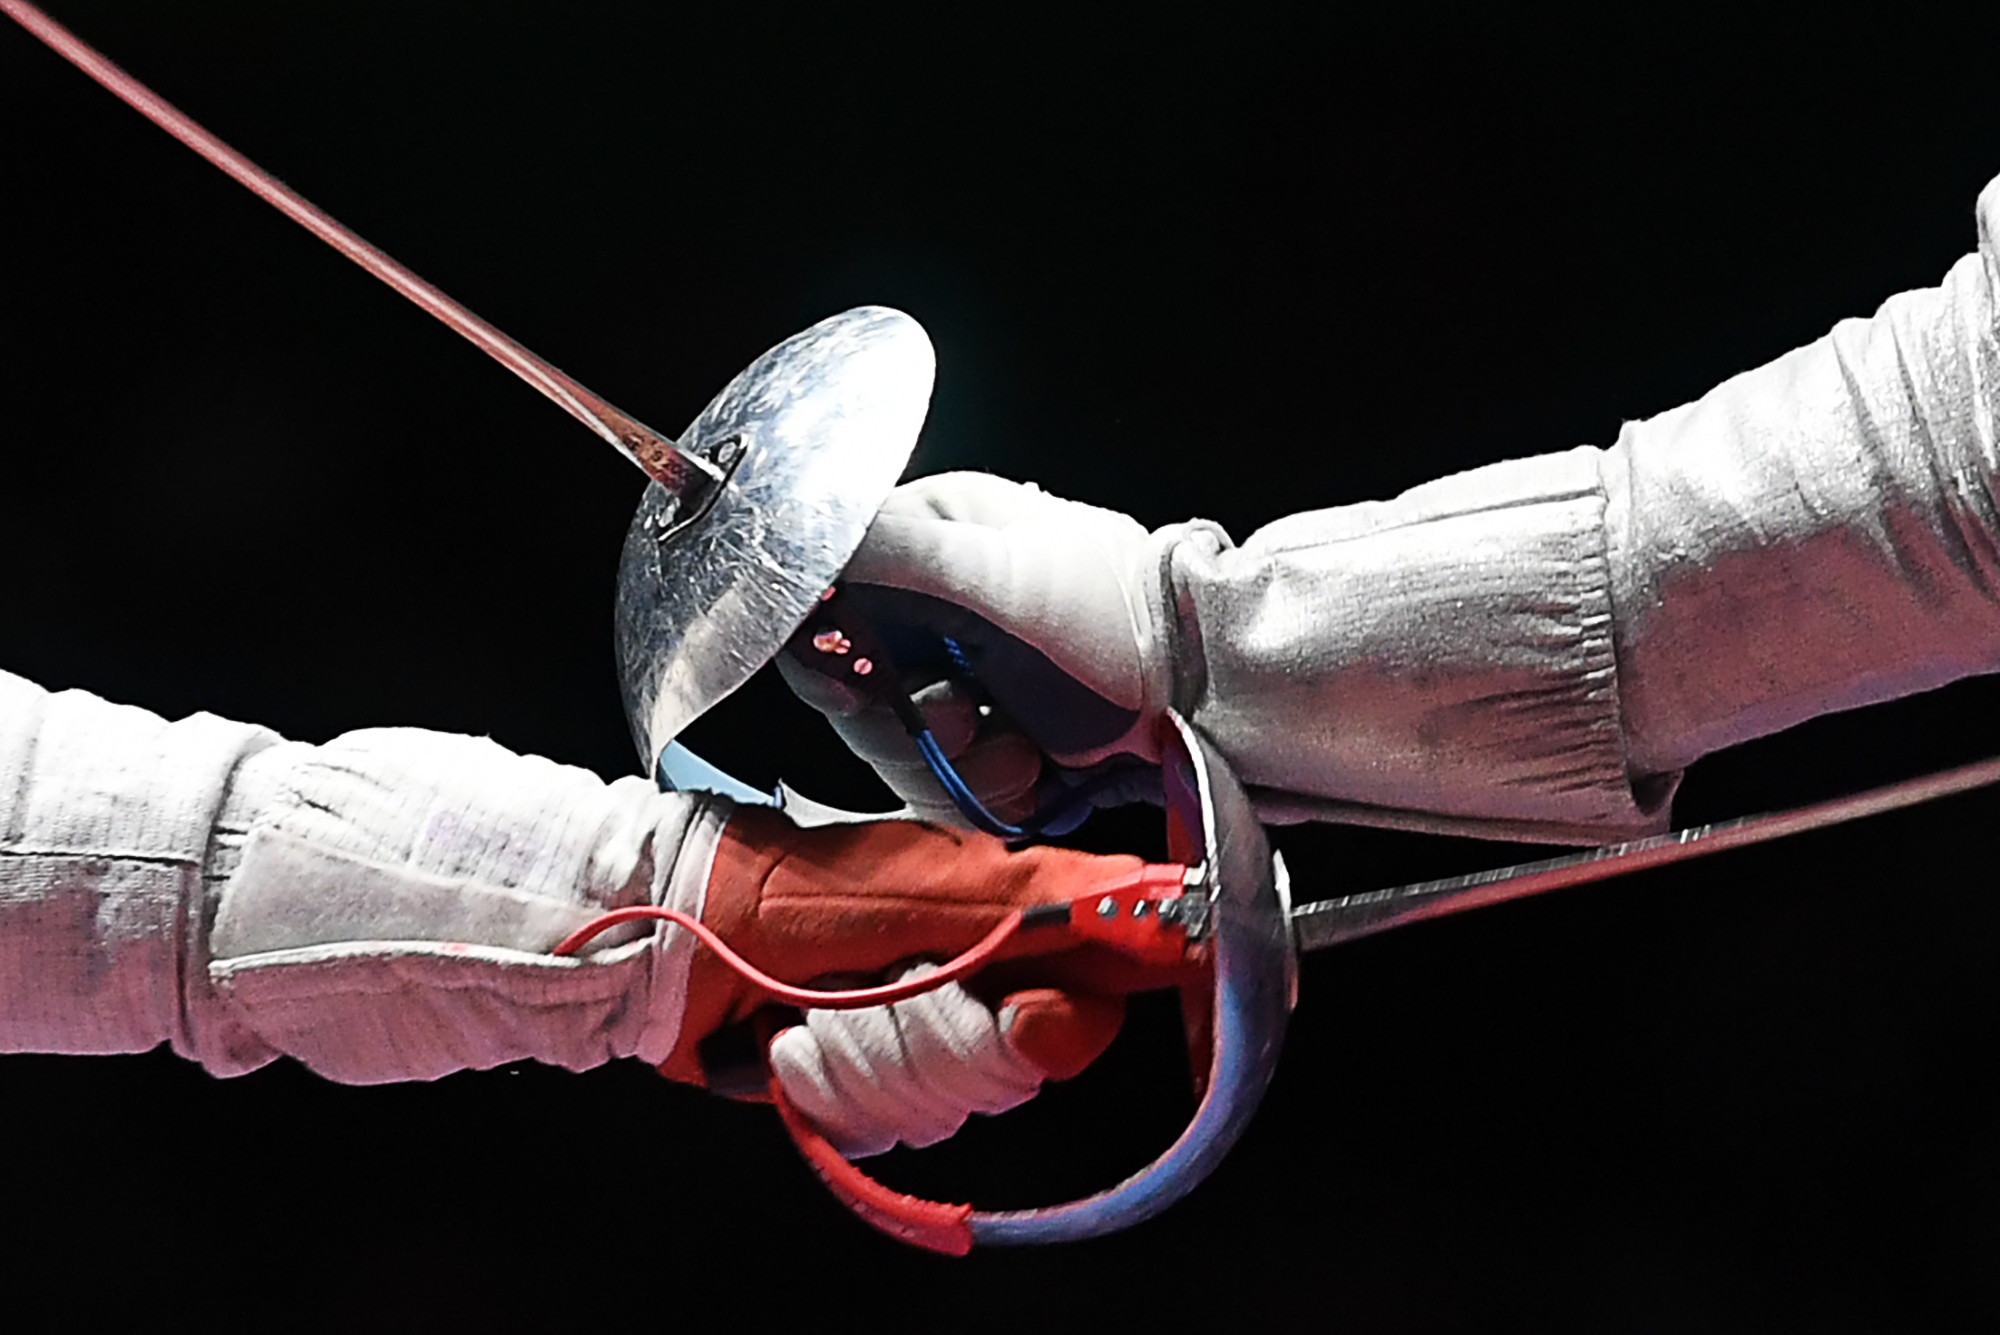 Home nations were dominant on day one of the Commonwealth Fencing Championships in London ©Getty Images